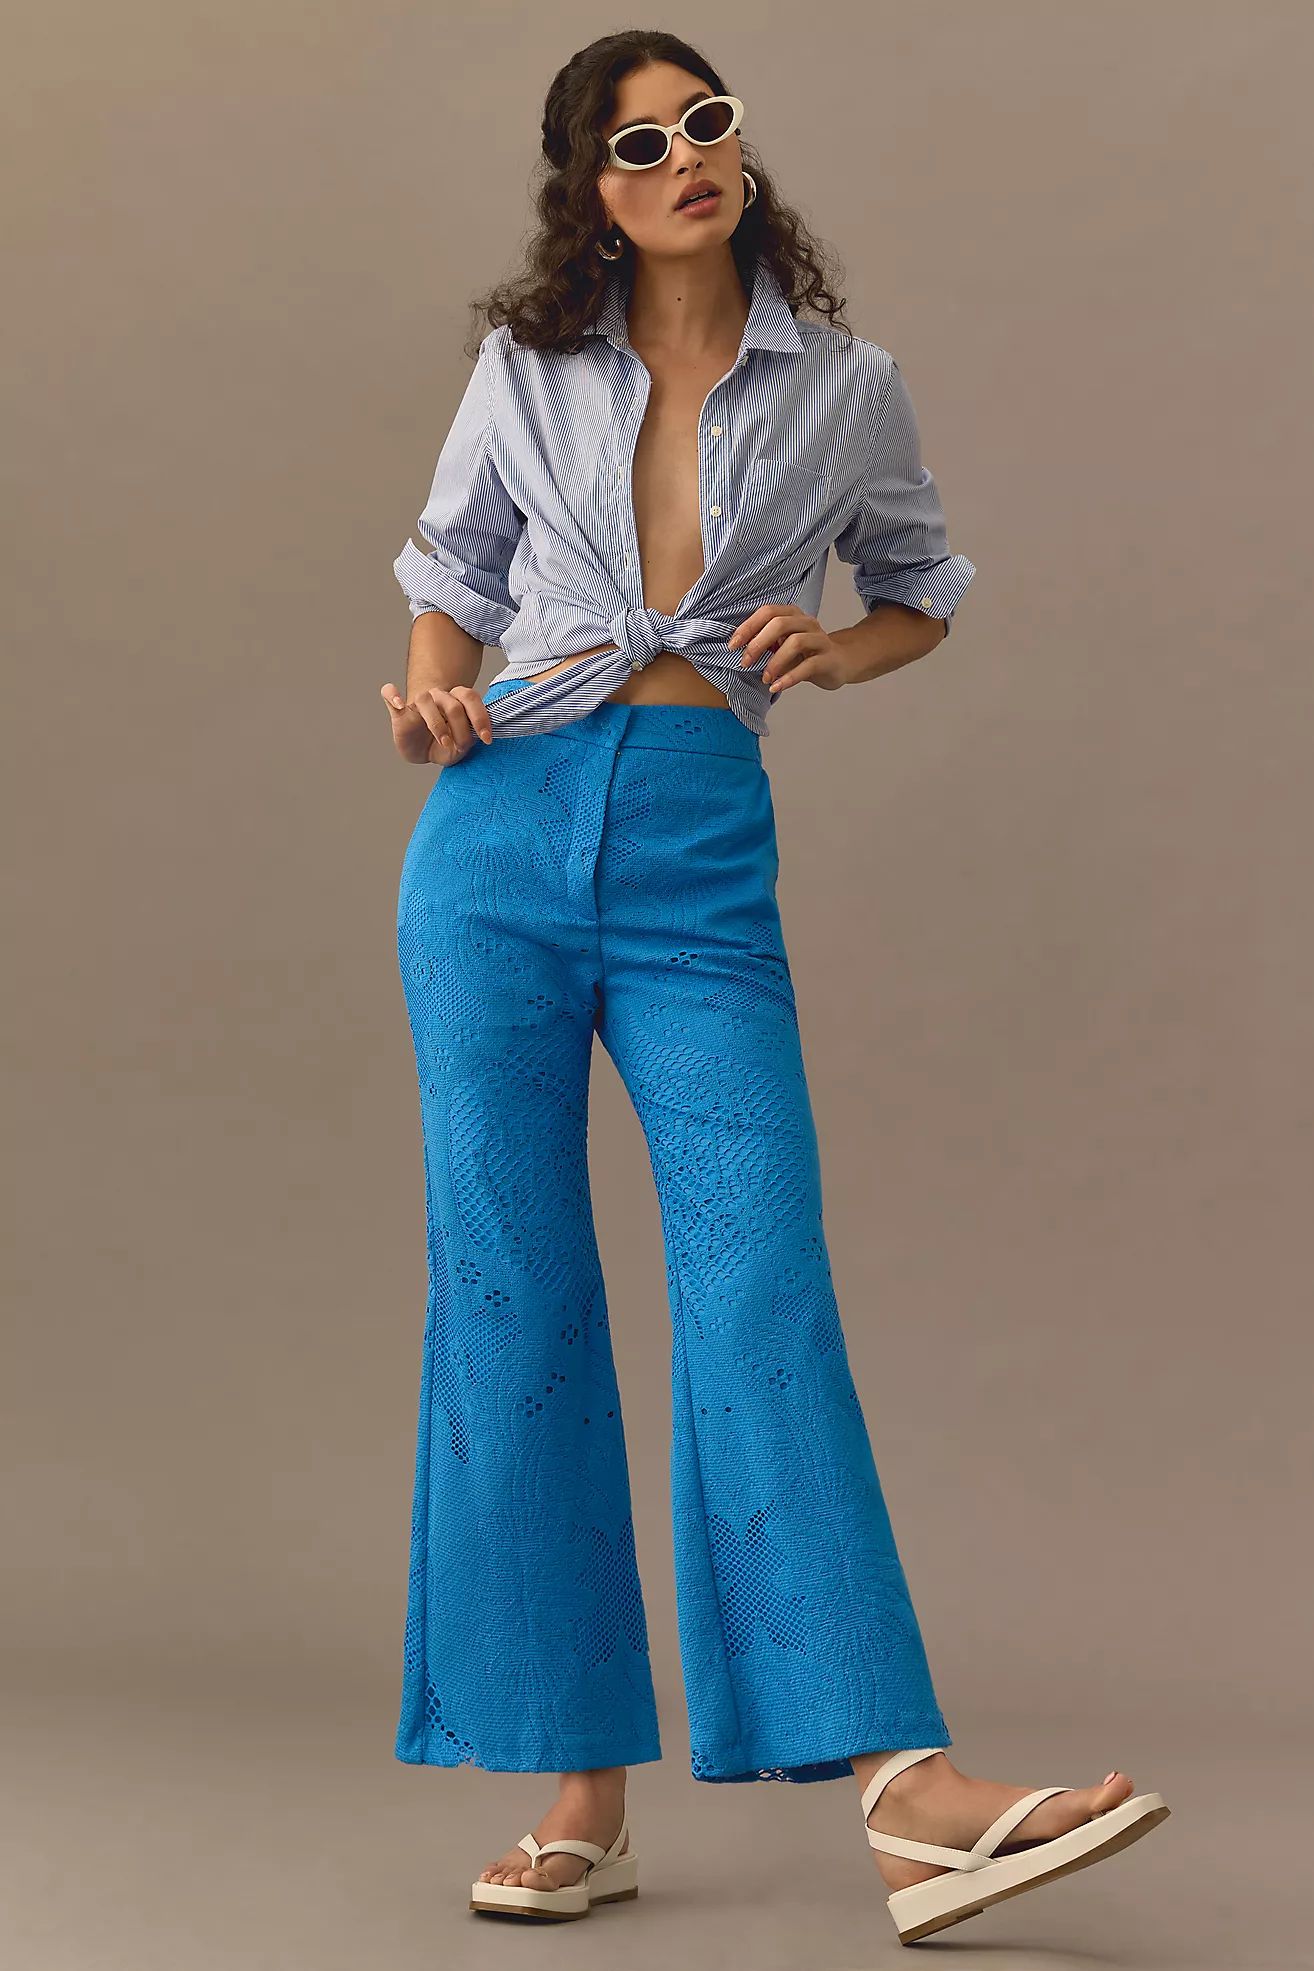 Beatrice .b Cropped Chino Pants | Anthropologie (US)